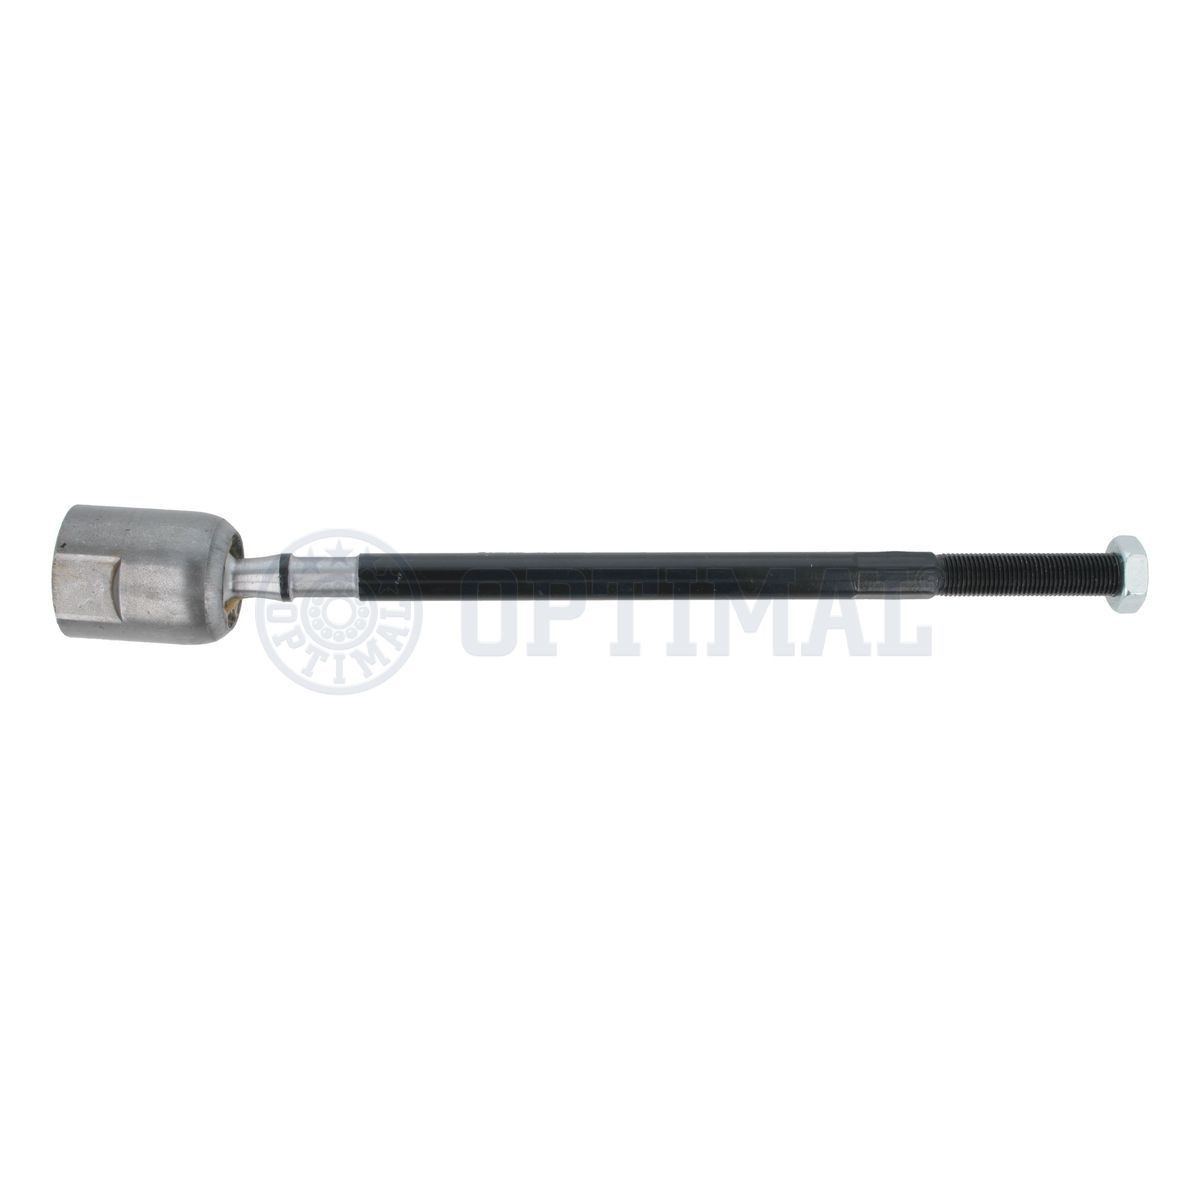 OPTIMAL Front Axle Right, M14 x 1,50, 228 mm Length: 228mm Tie rod axle joint G2-119 buy